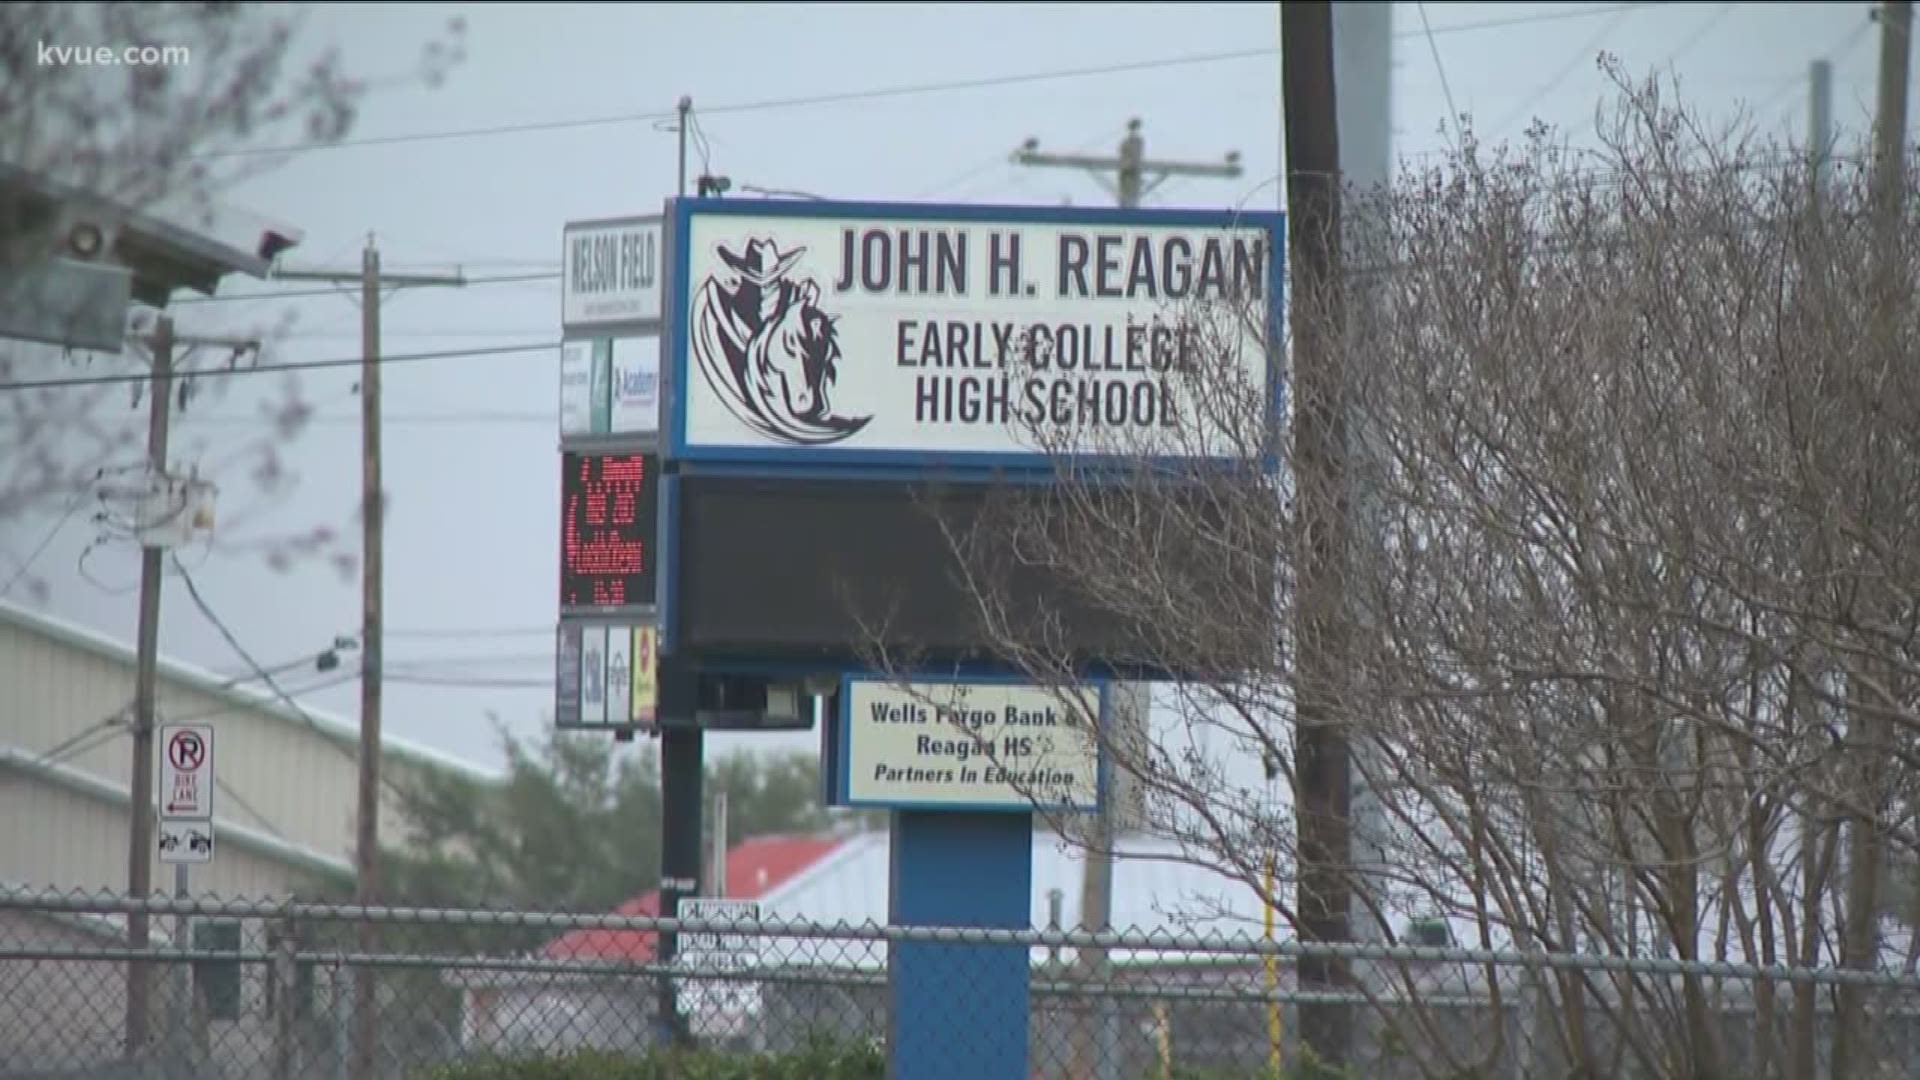 A Northeast Austin high school is about to get a new name.